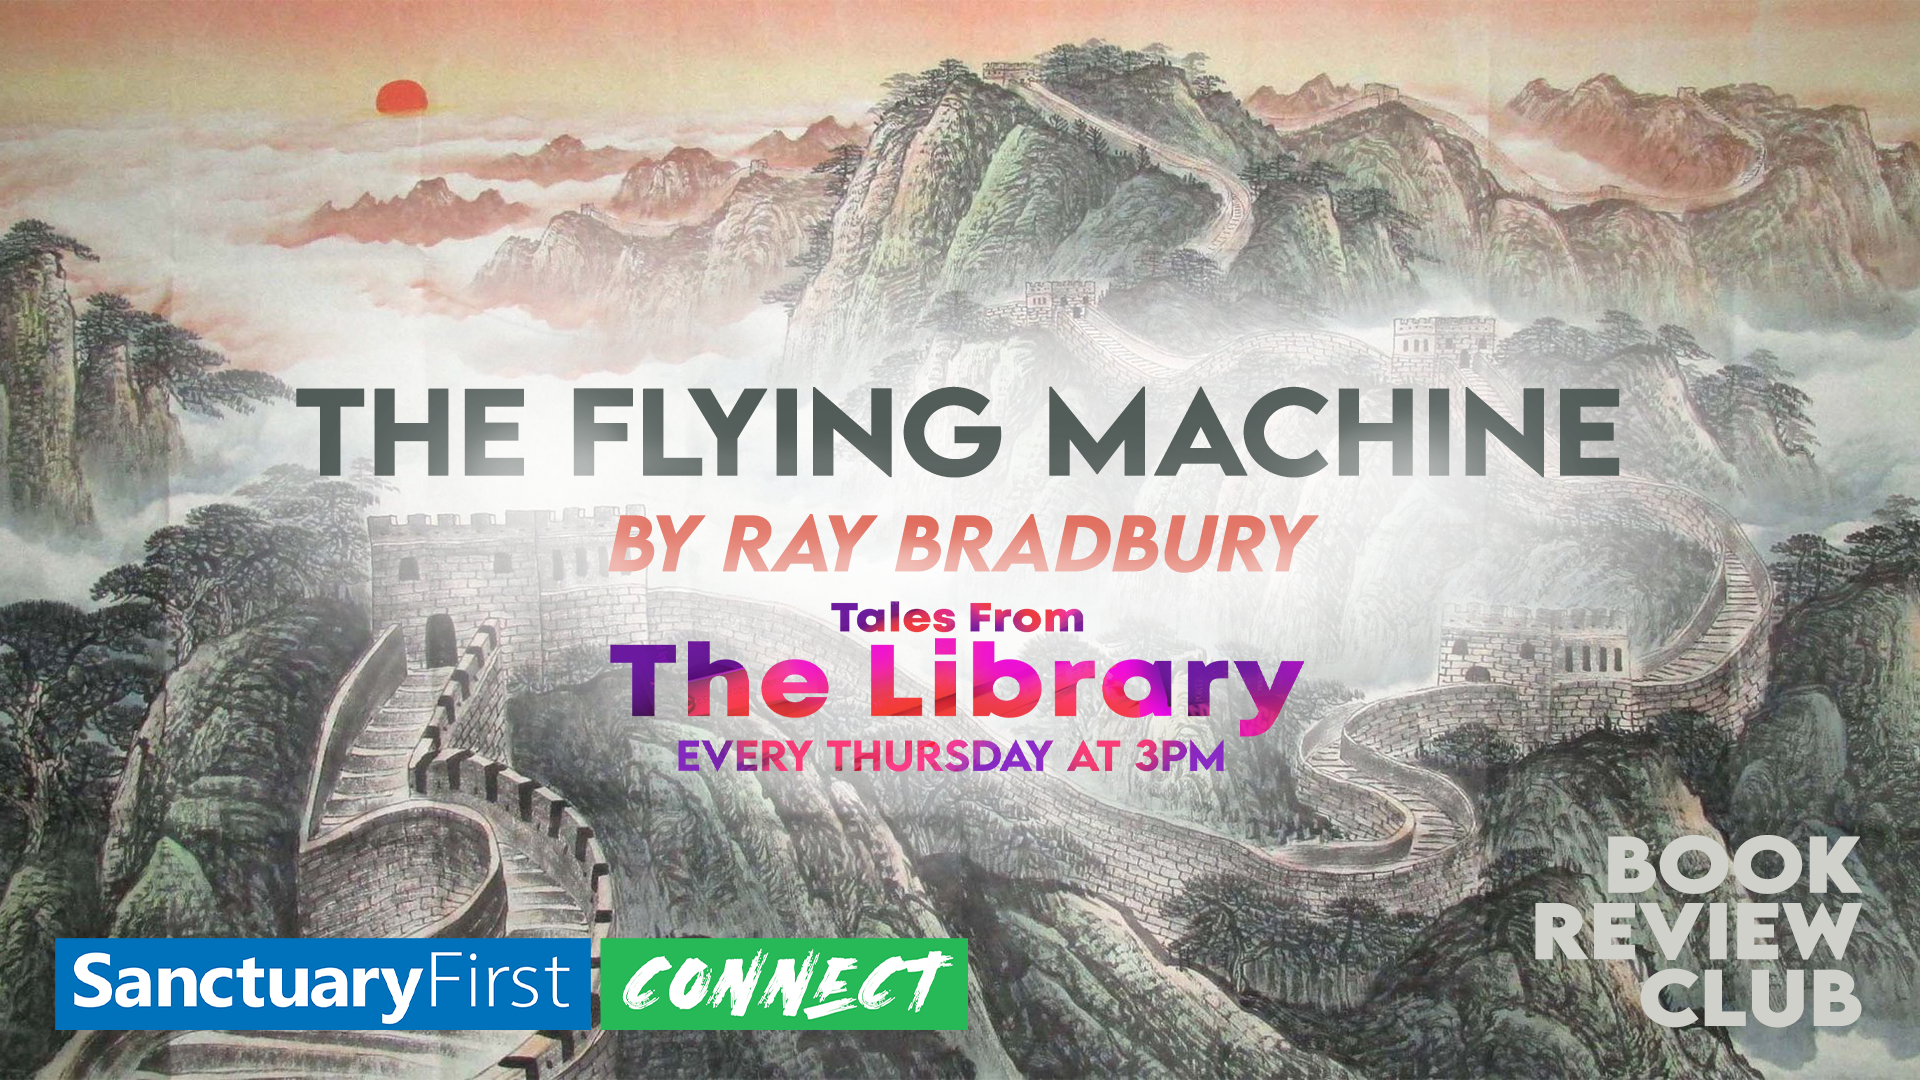 Tales From The Library - The Flying Machine